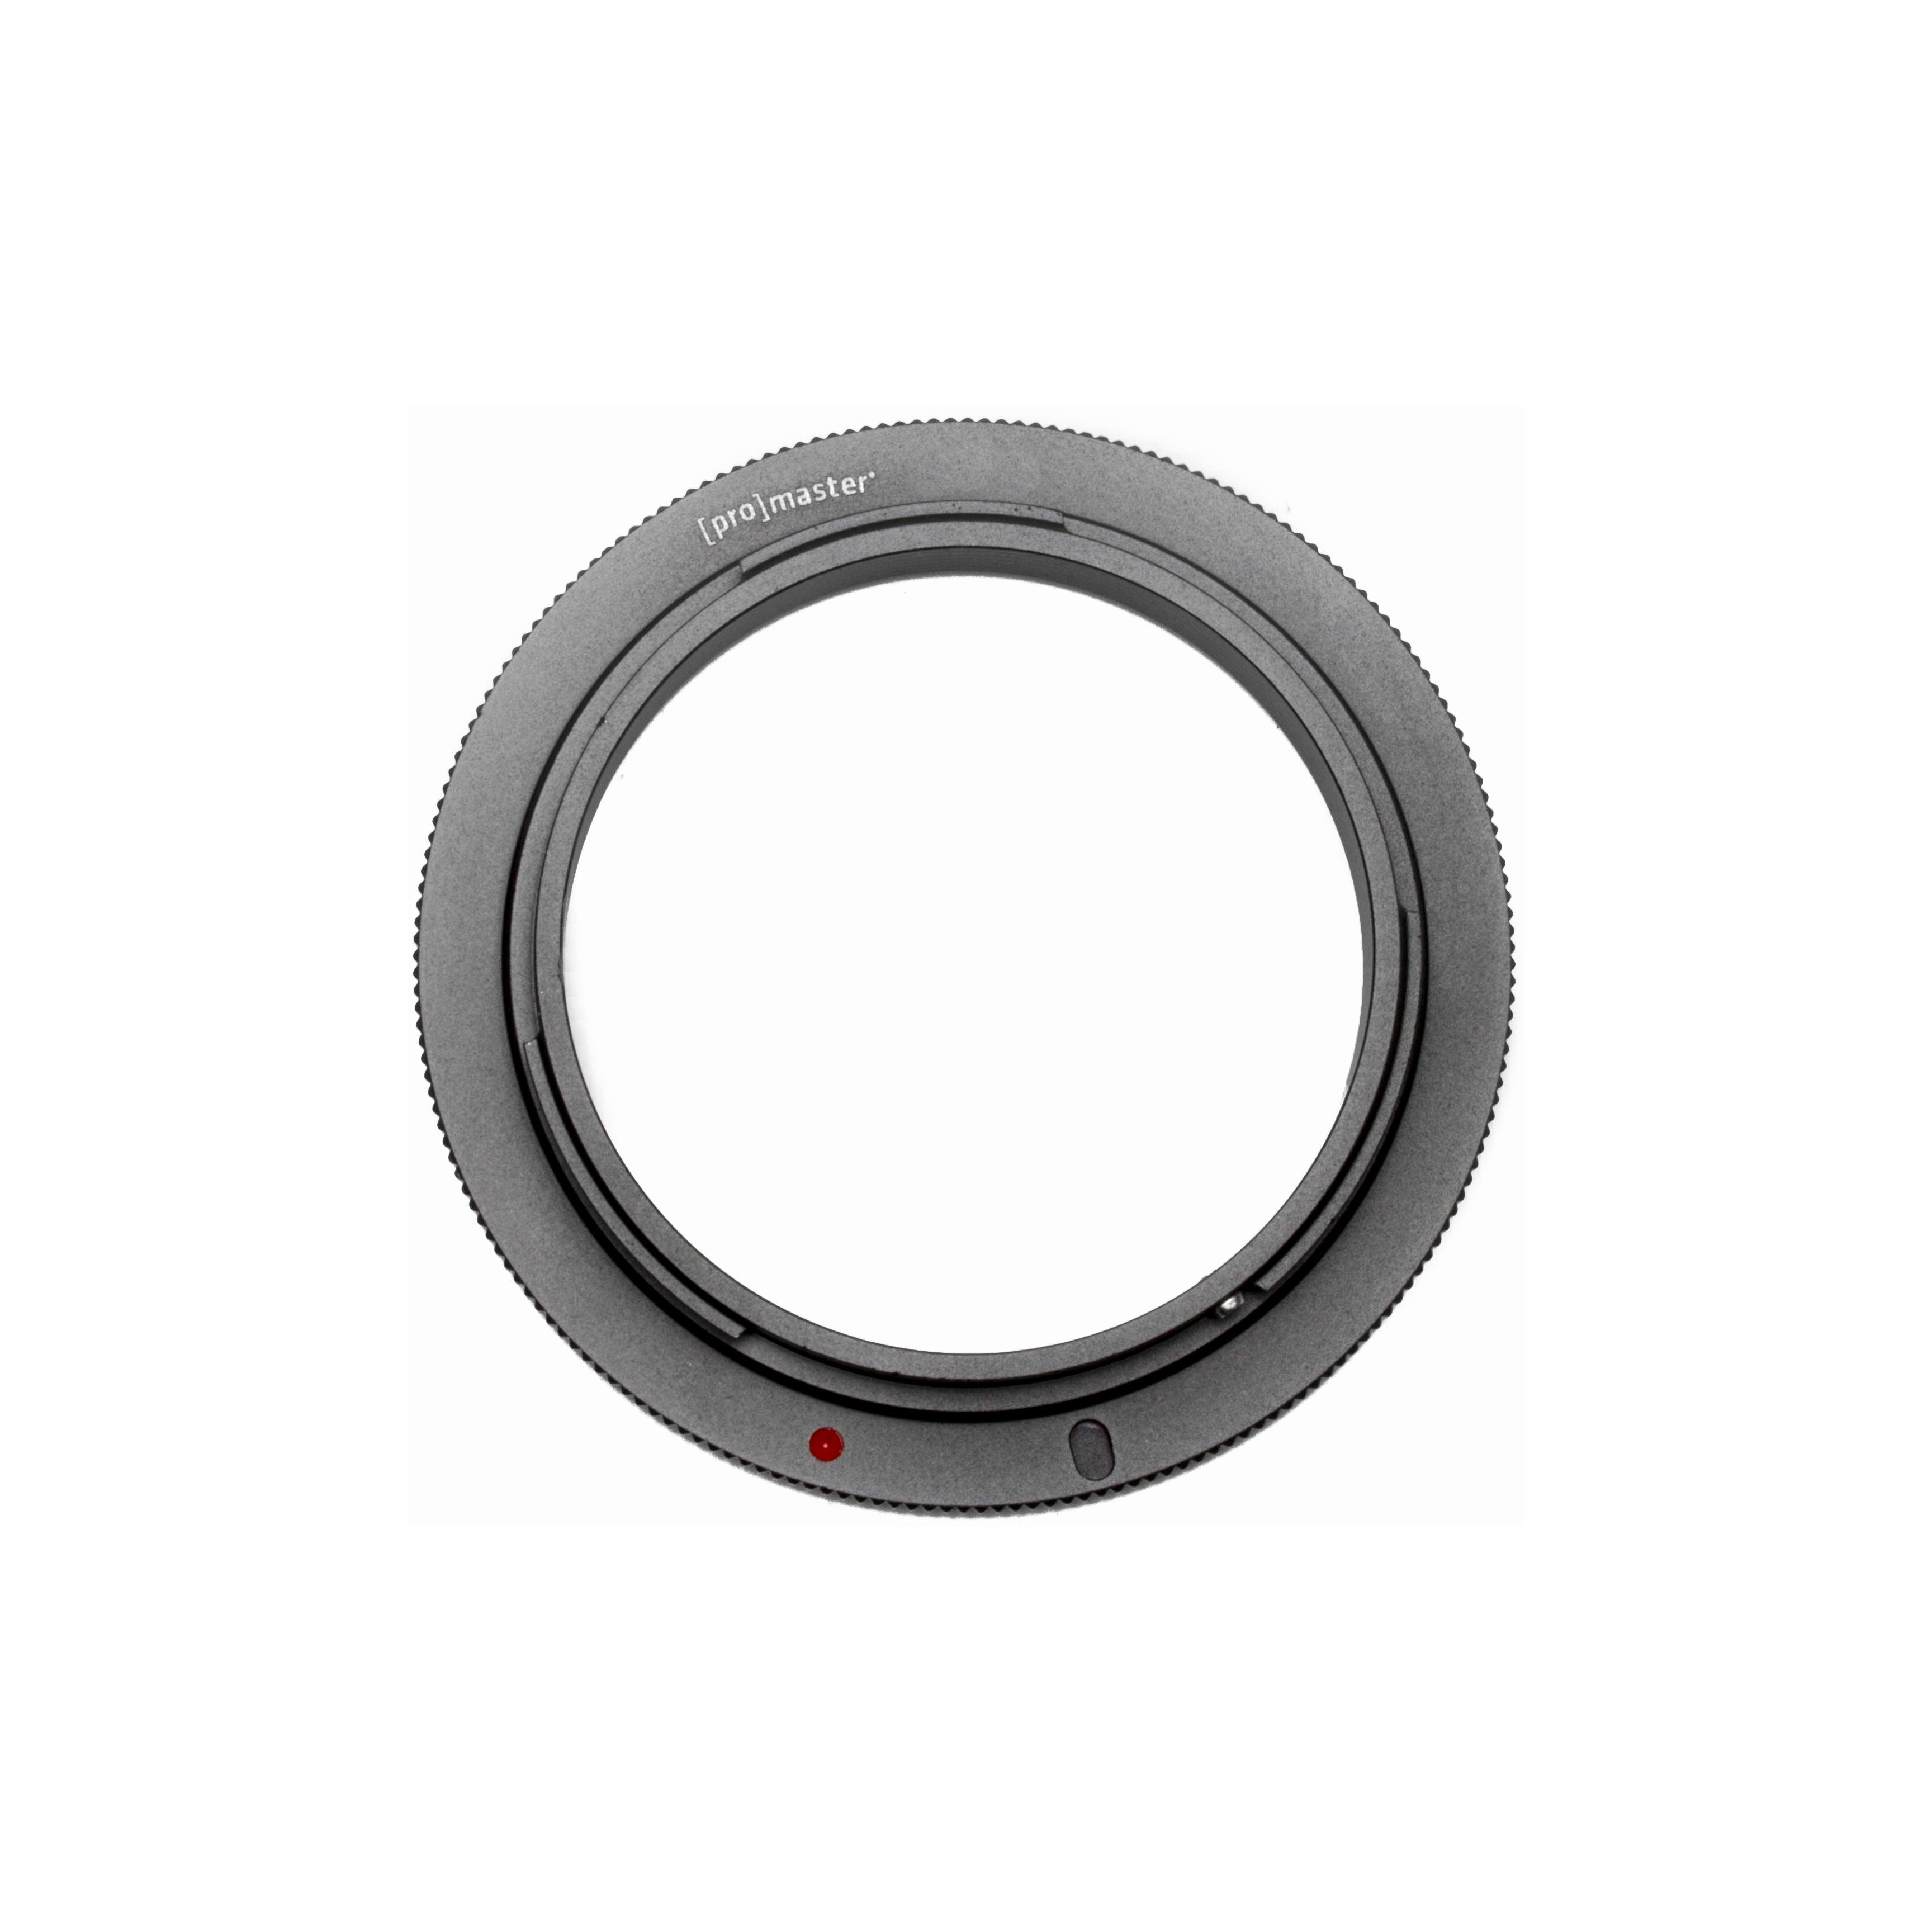 Promaster 6665 Reverse Ring - 72mm Canon